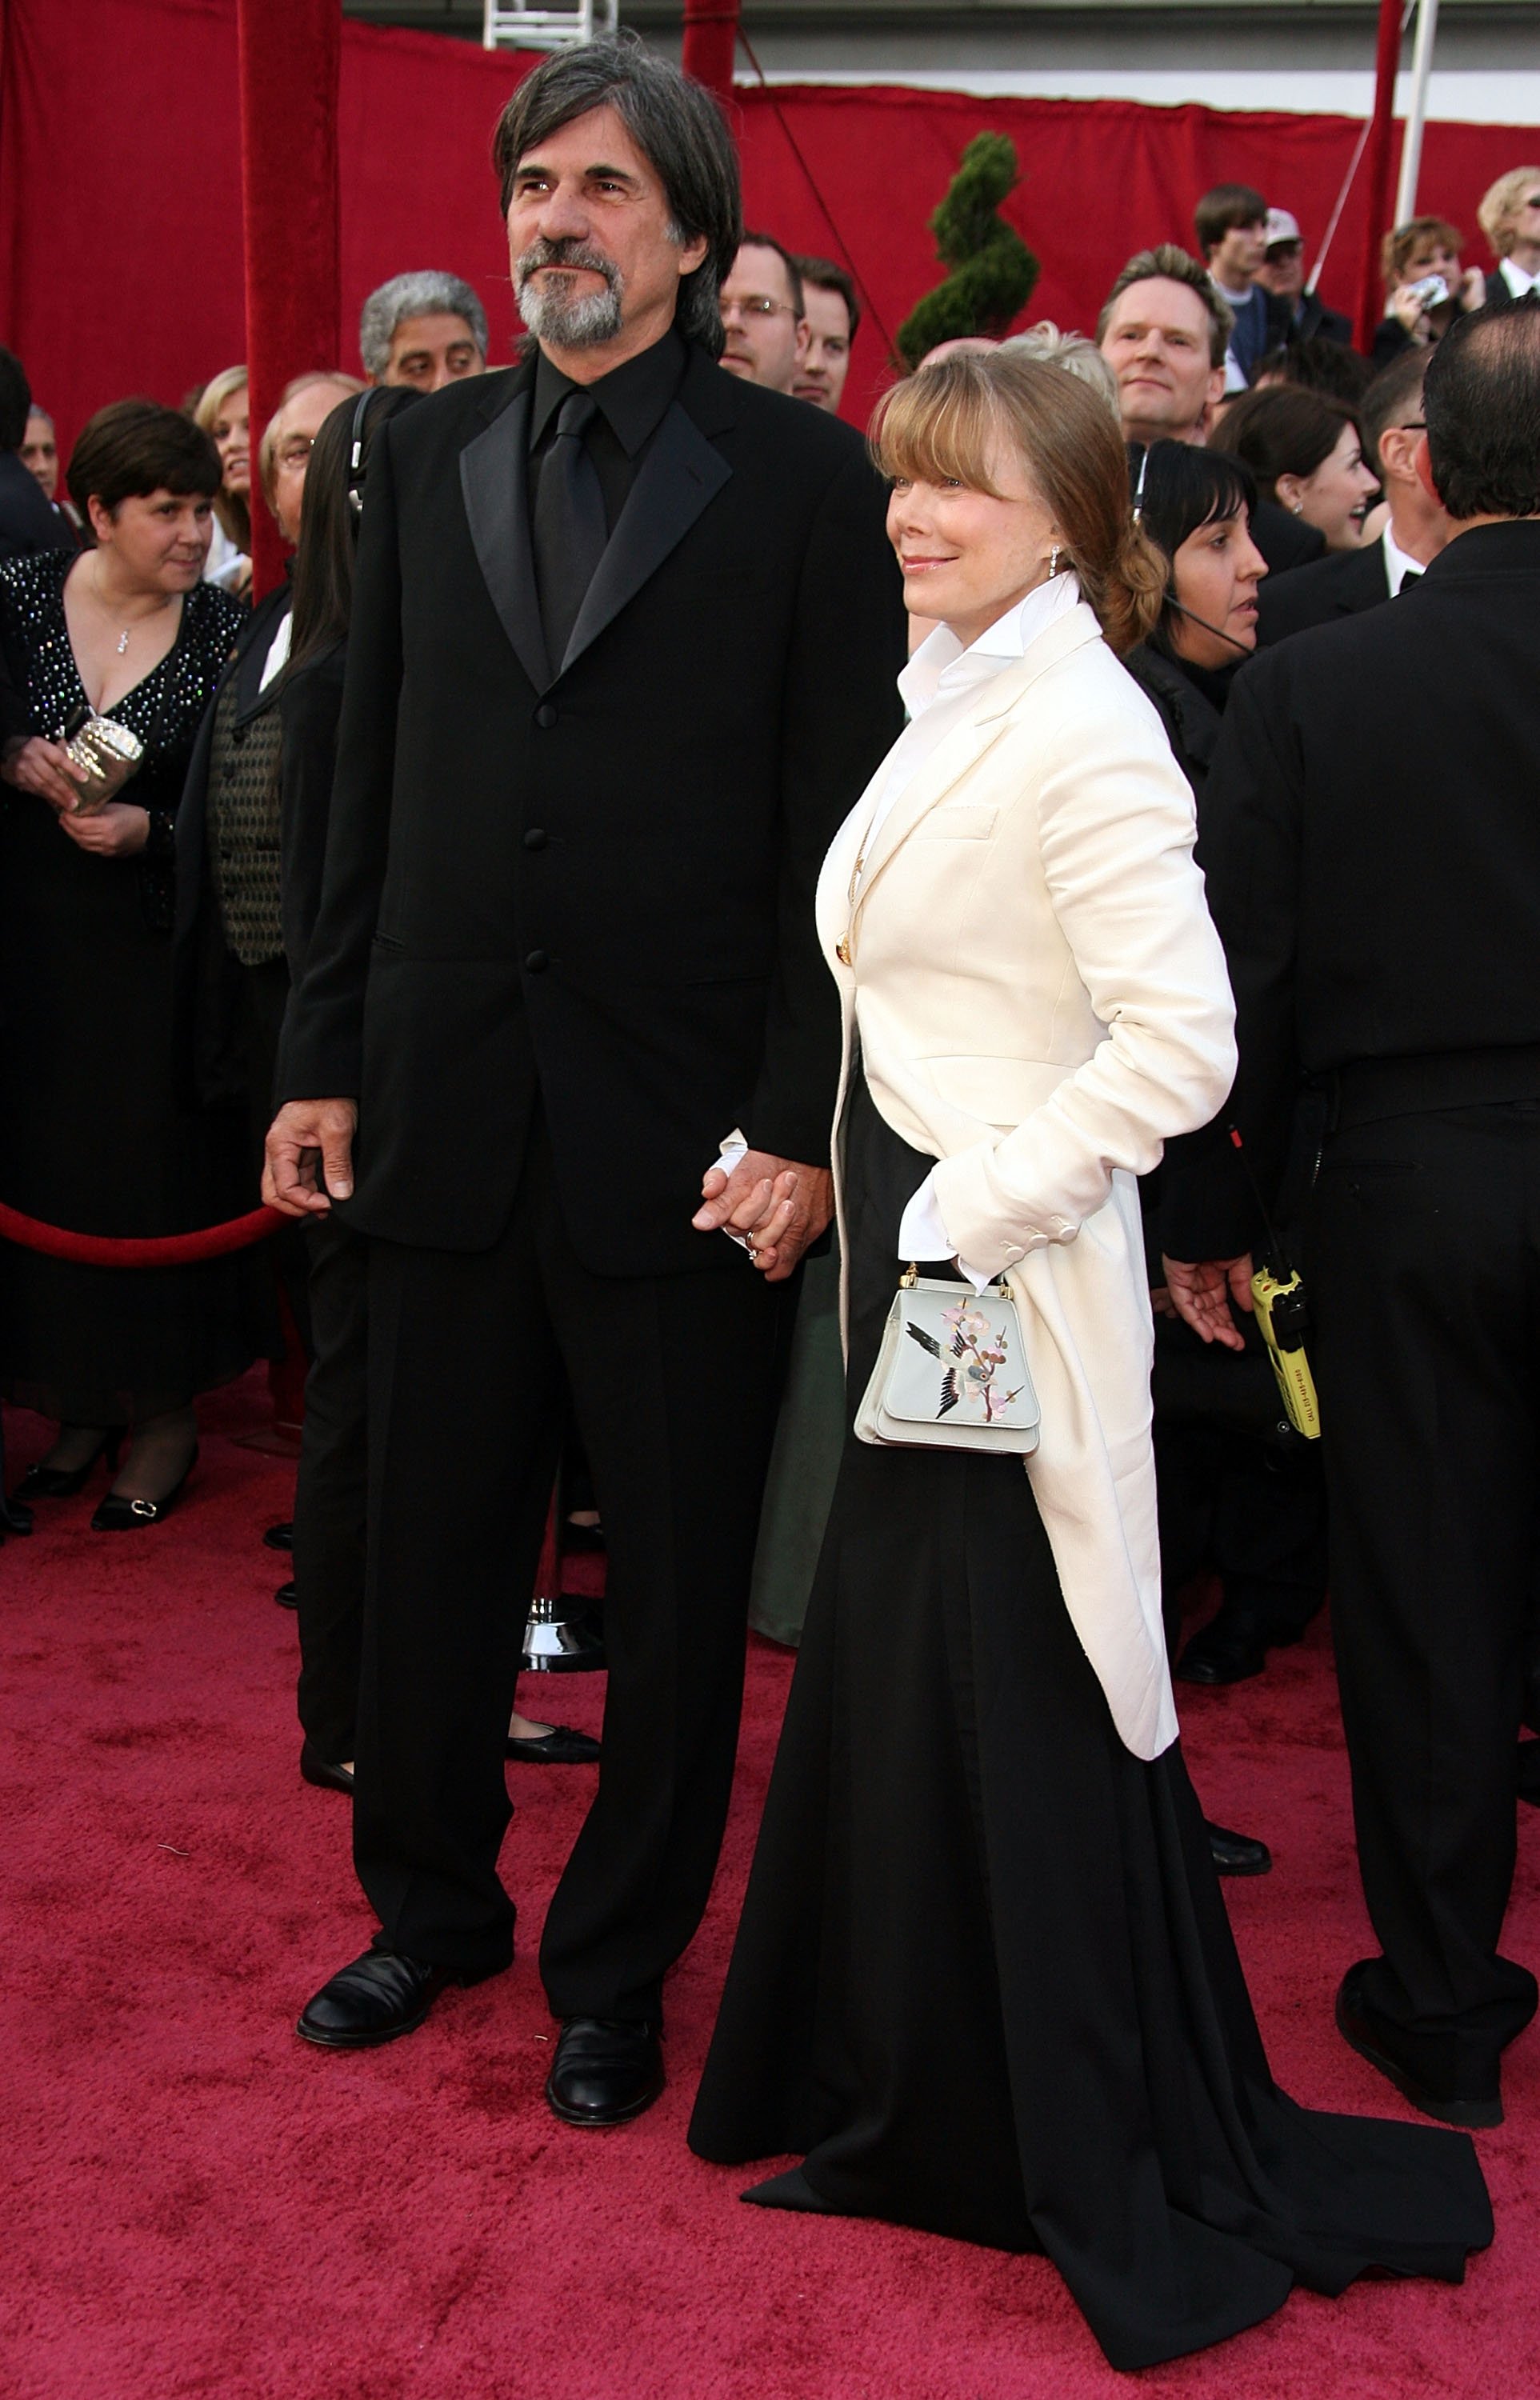 Jack Fisk and actress Sissy Spacek arrive at the 80th Annual Academy Awards held at the Kodak Theatre on February 24, 2008, in Hollywood, California. | Source: Getty Images.